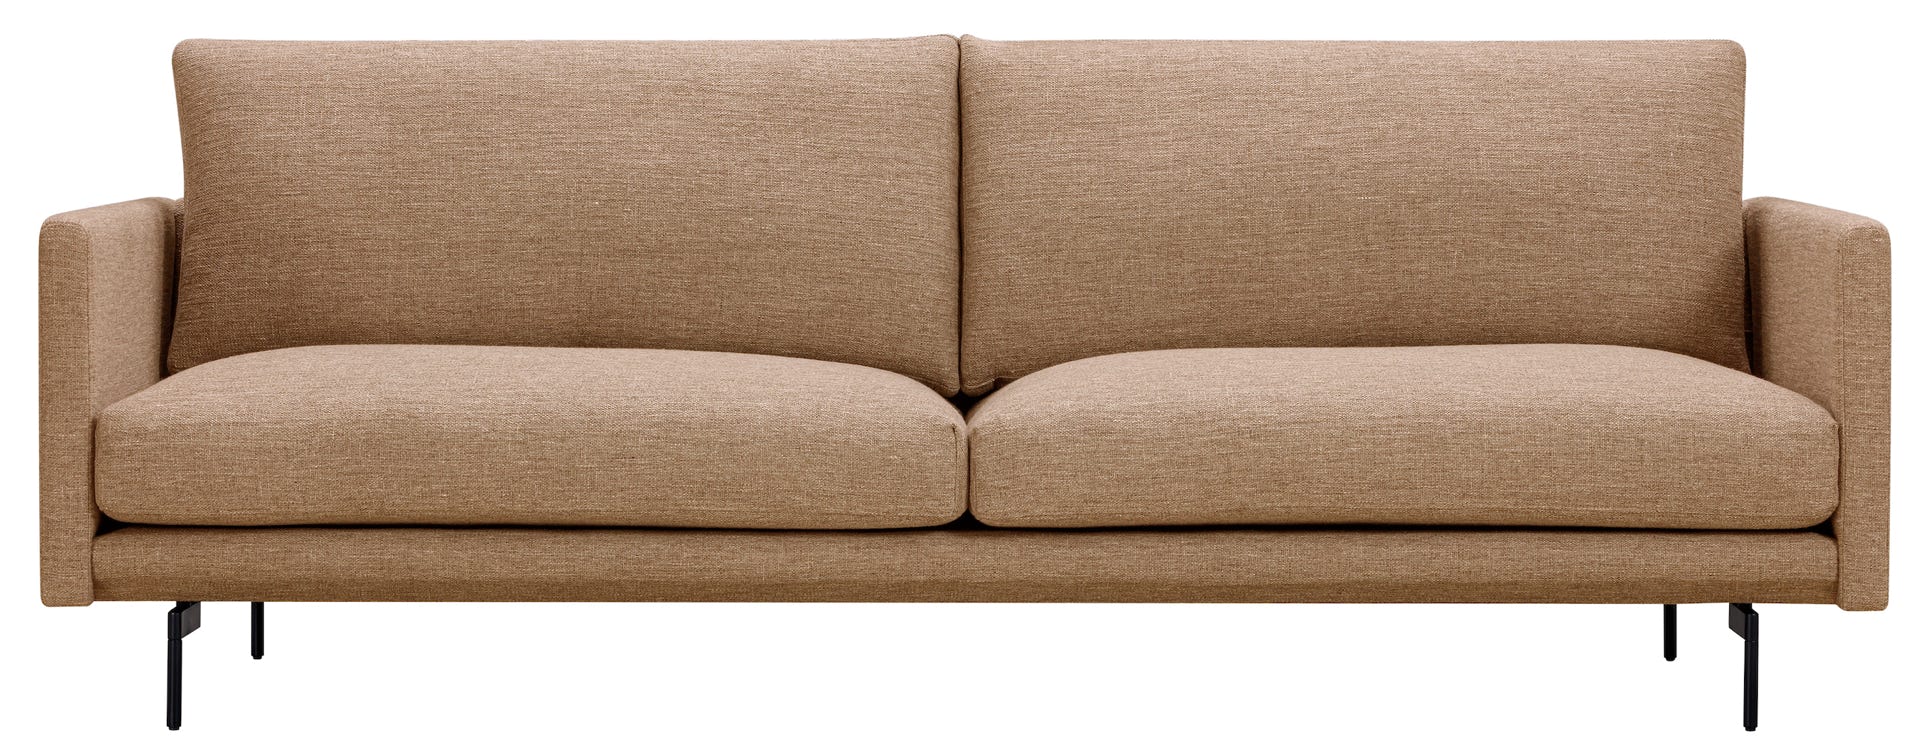 3 seater sofa - upholstery Julie 10 fabric (price group 4)